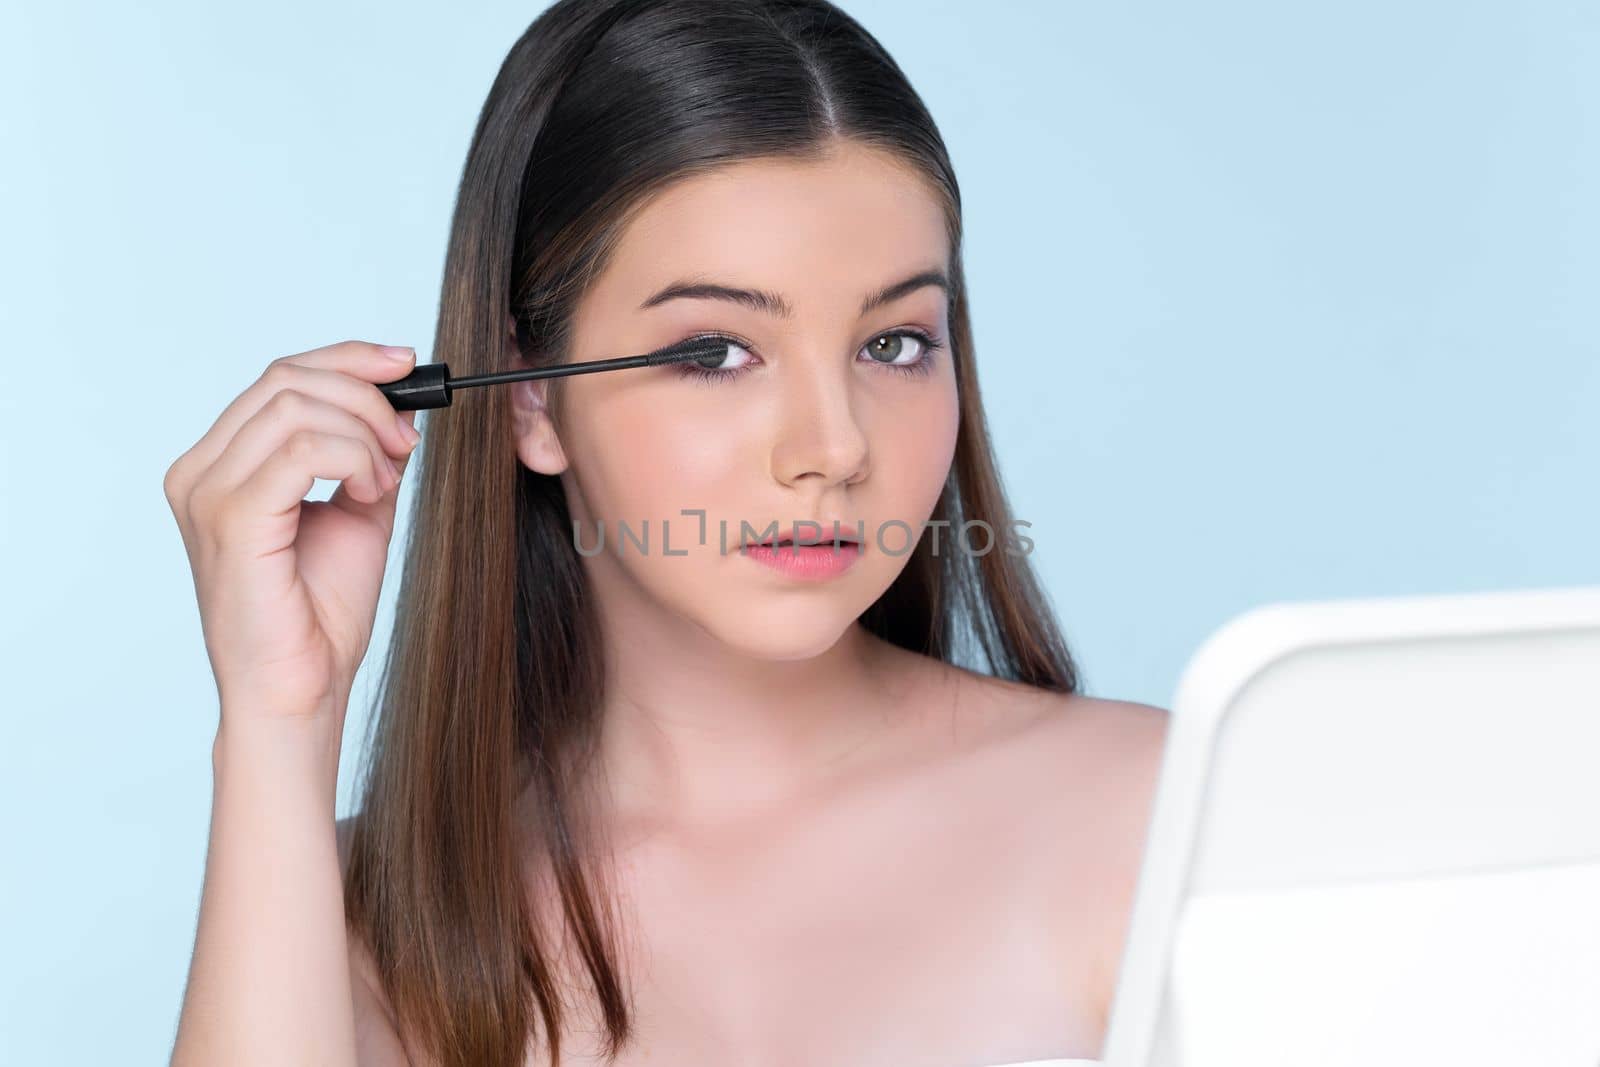 Closeup portrait of young charming applying makeup eyeshadow on her face with brush, mascara with flawless smooth skin for beauty concept.